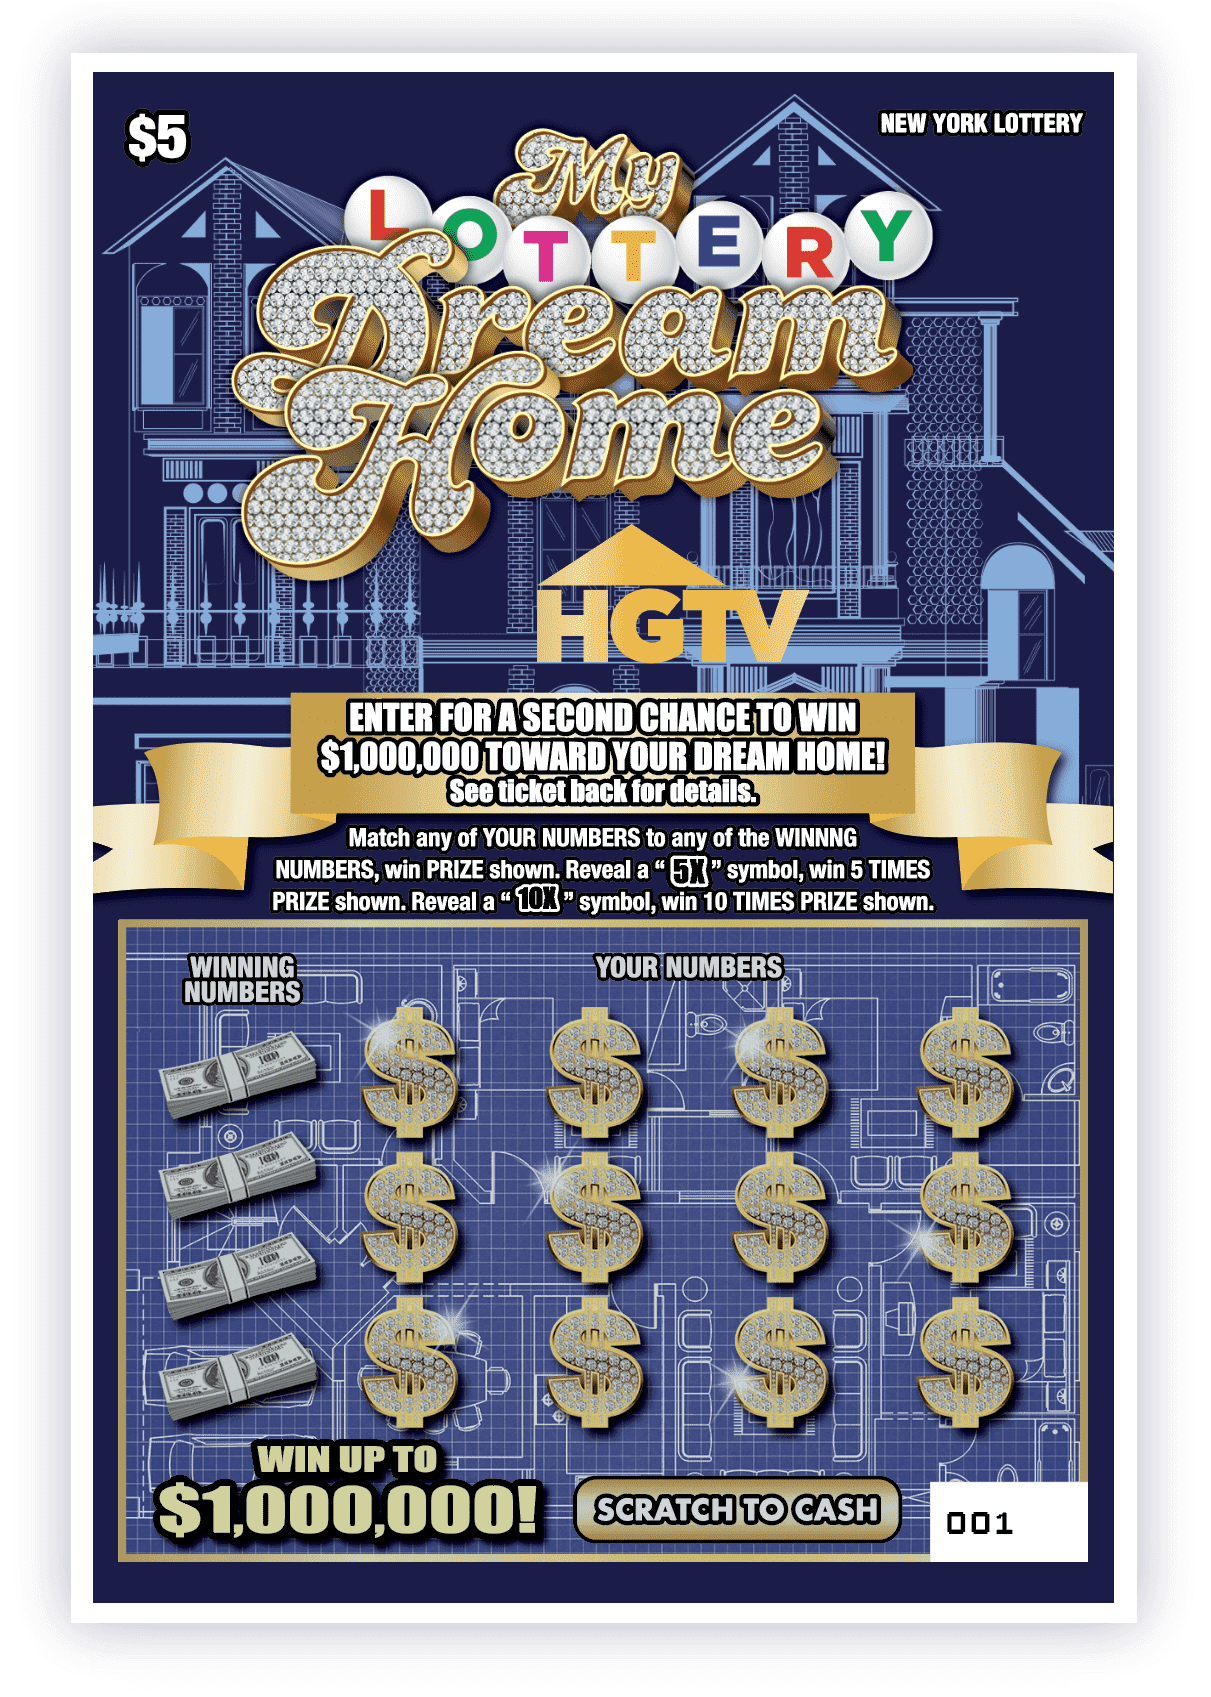 ny state lottery scratch off codes